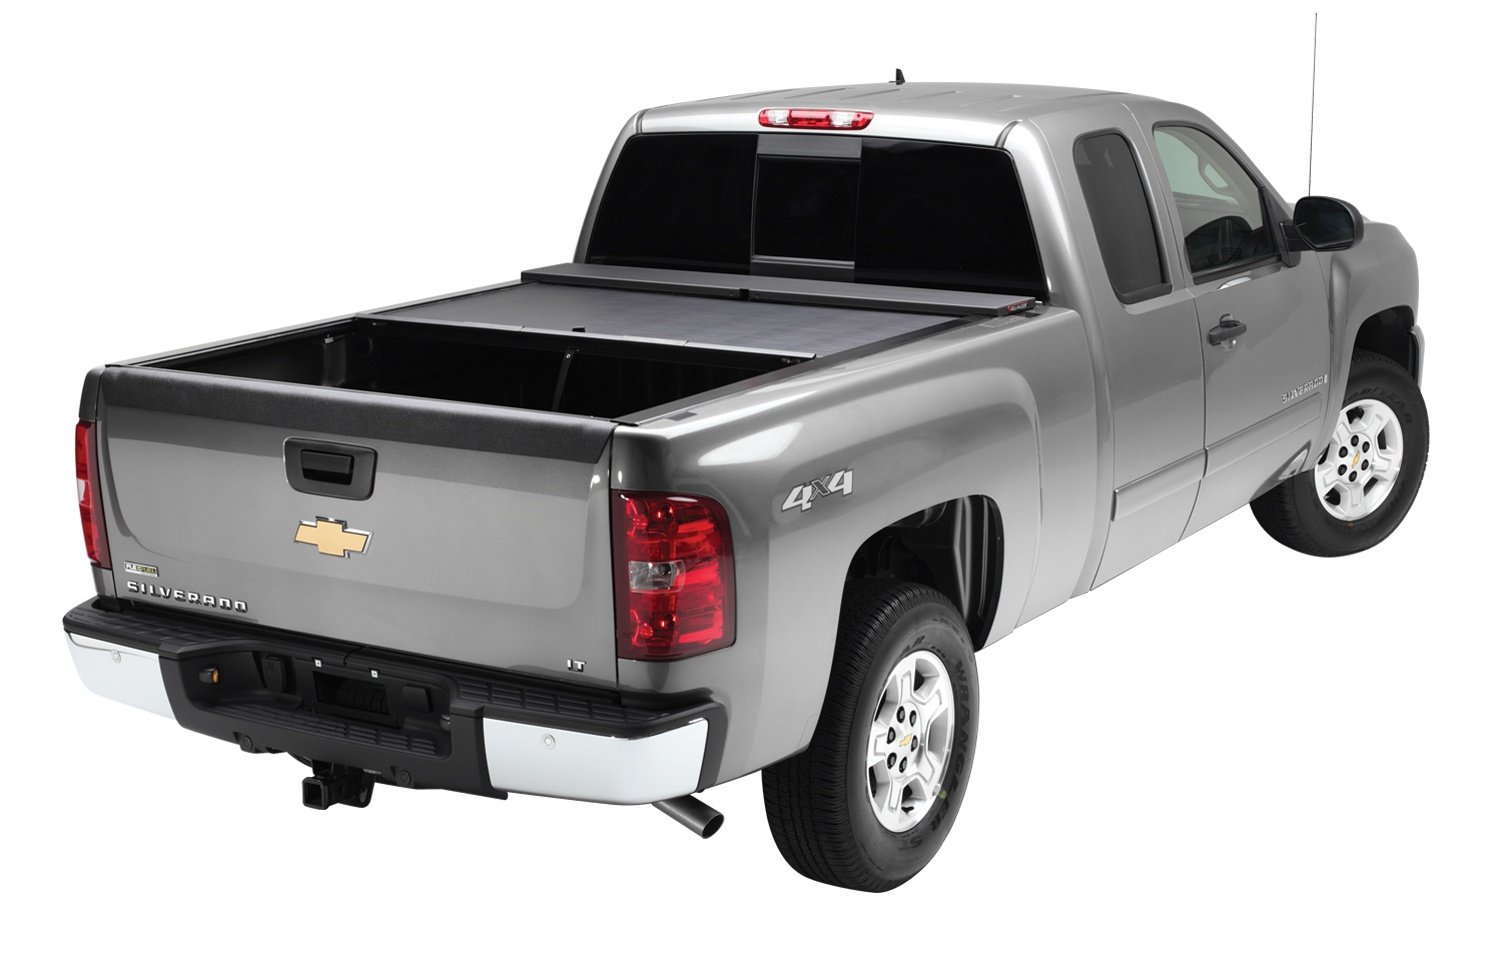 LG271M M-Series Locking Retractable Truck Bed Cover for 2007-2013 GM Silverado/Sierra [5.8 ft. Bed]